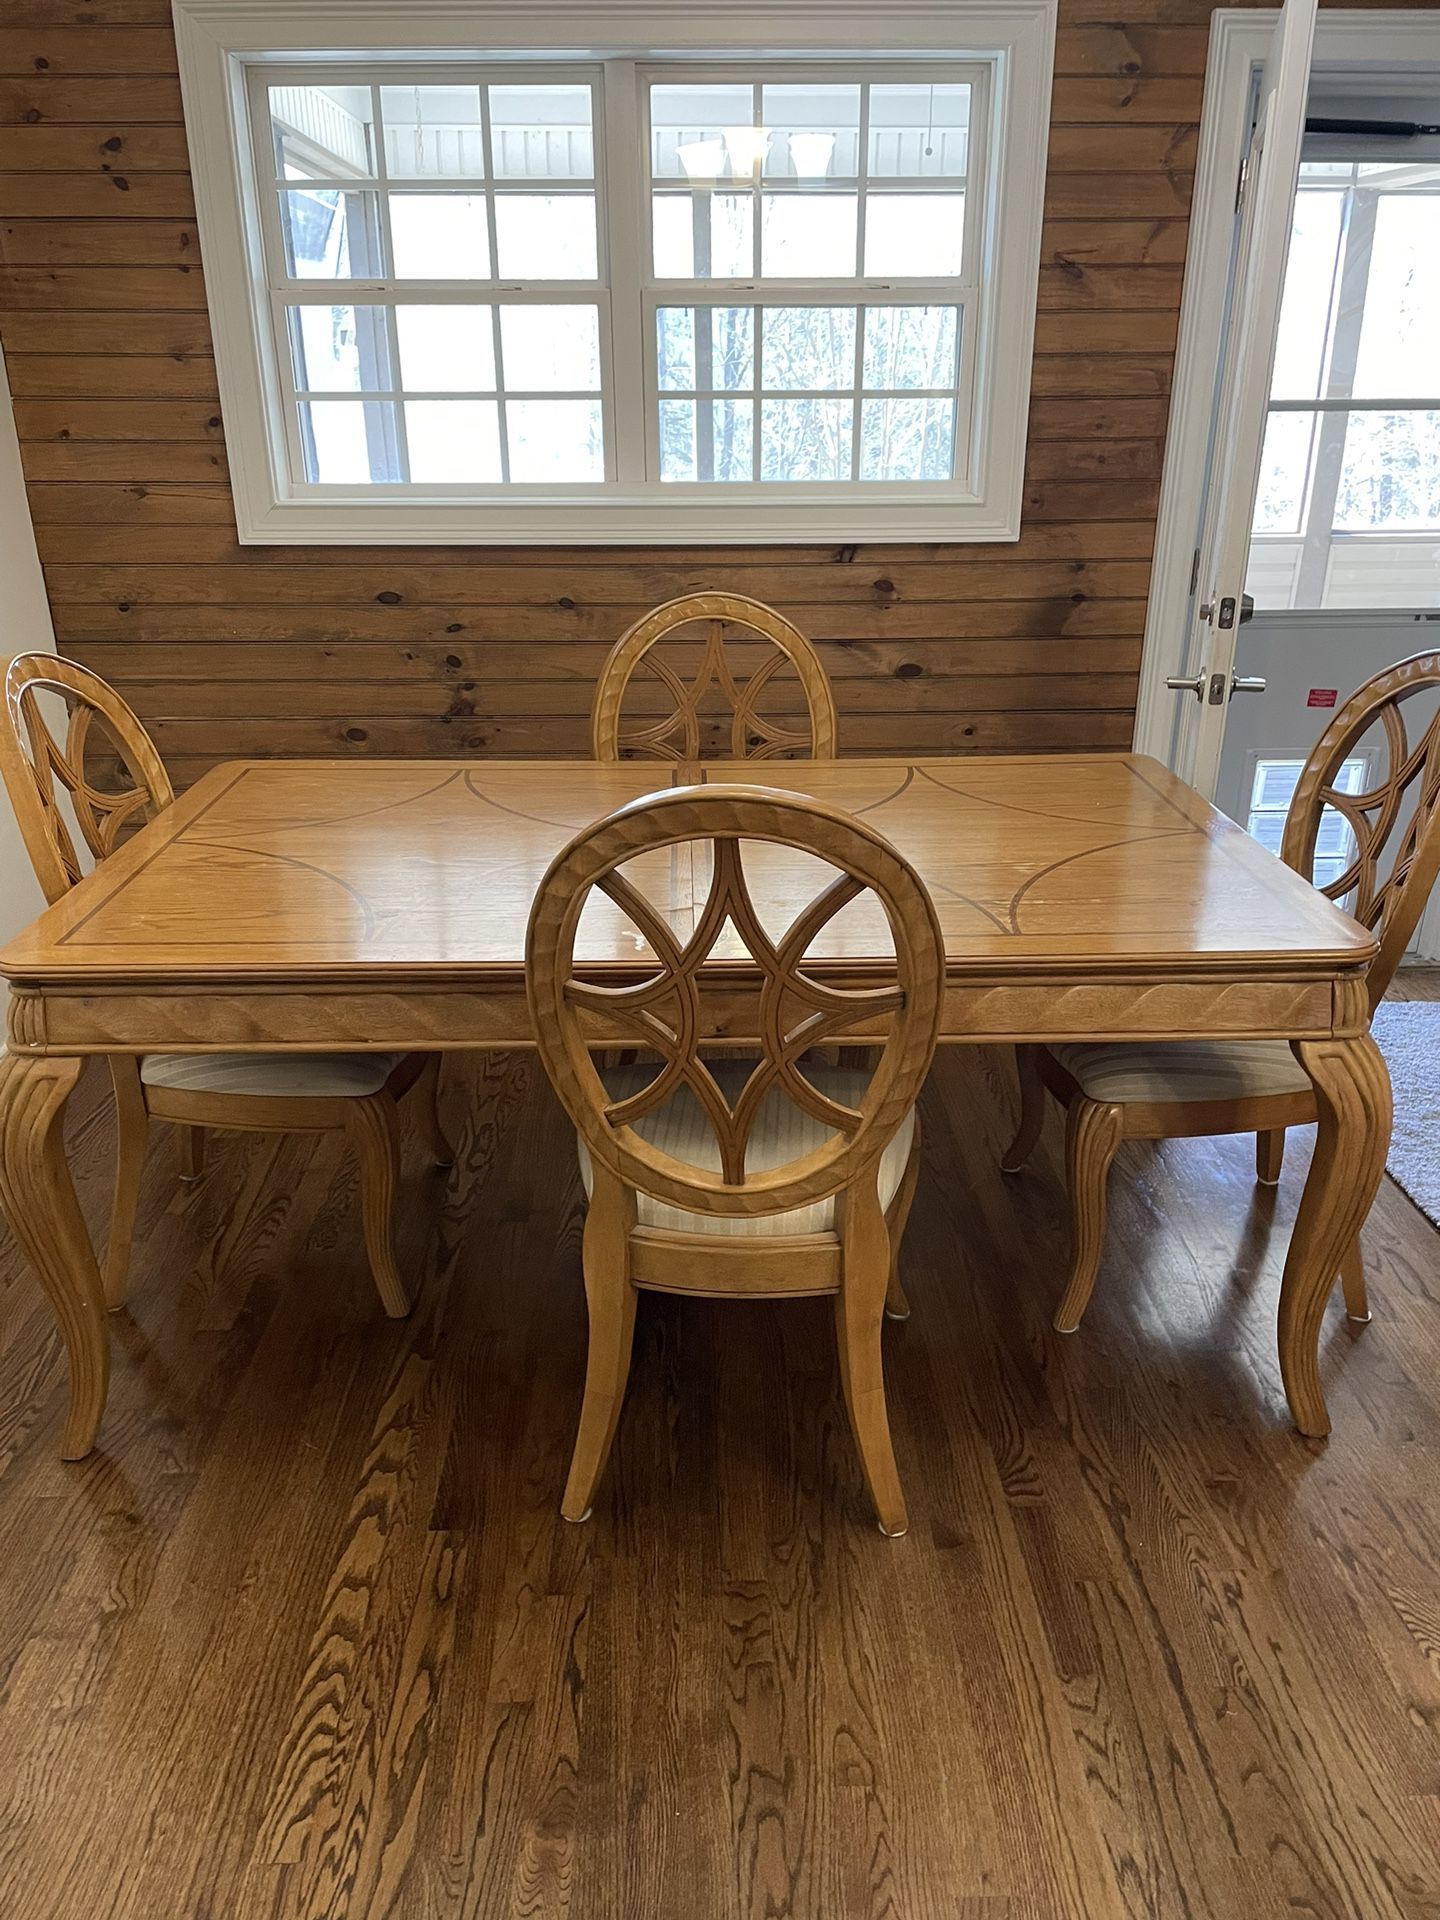 Solid Wood Kitchen Table 4 Chairs 